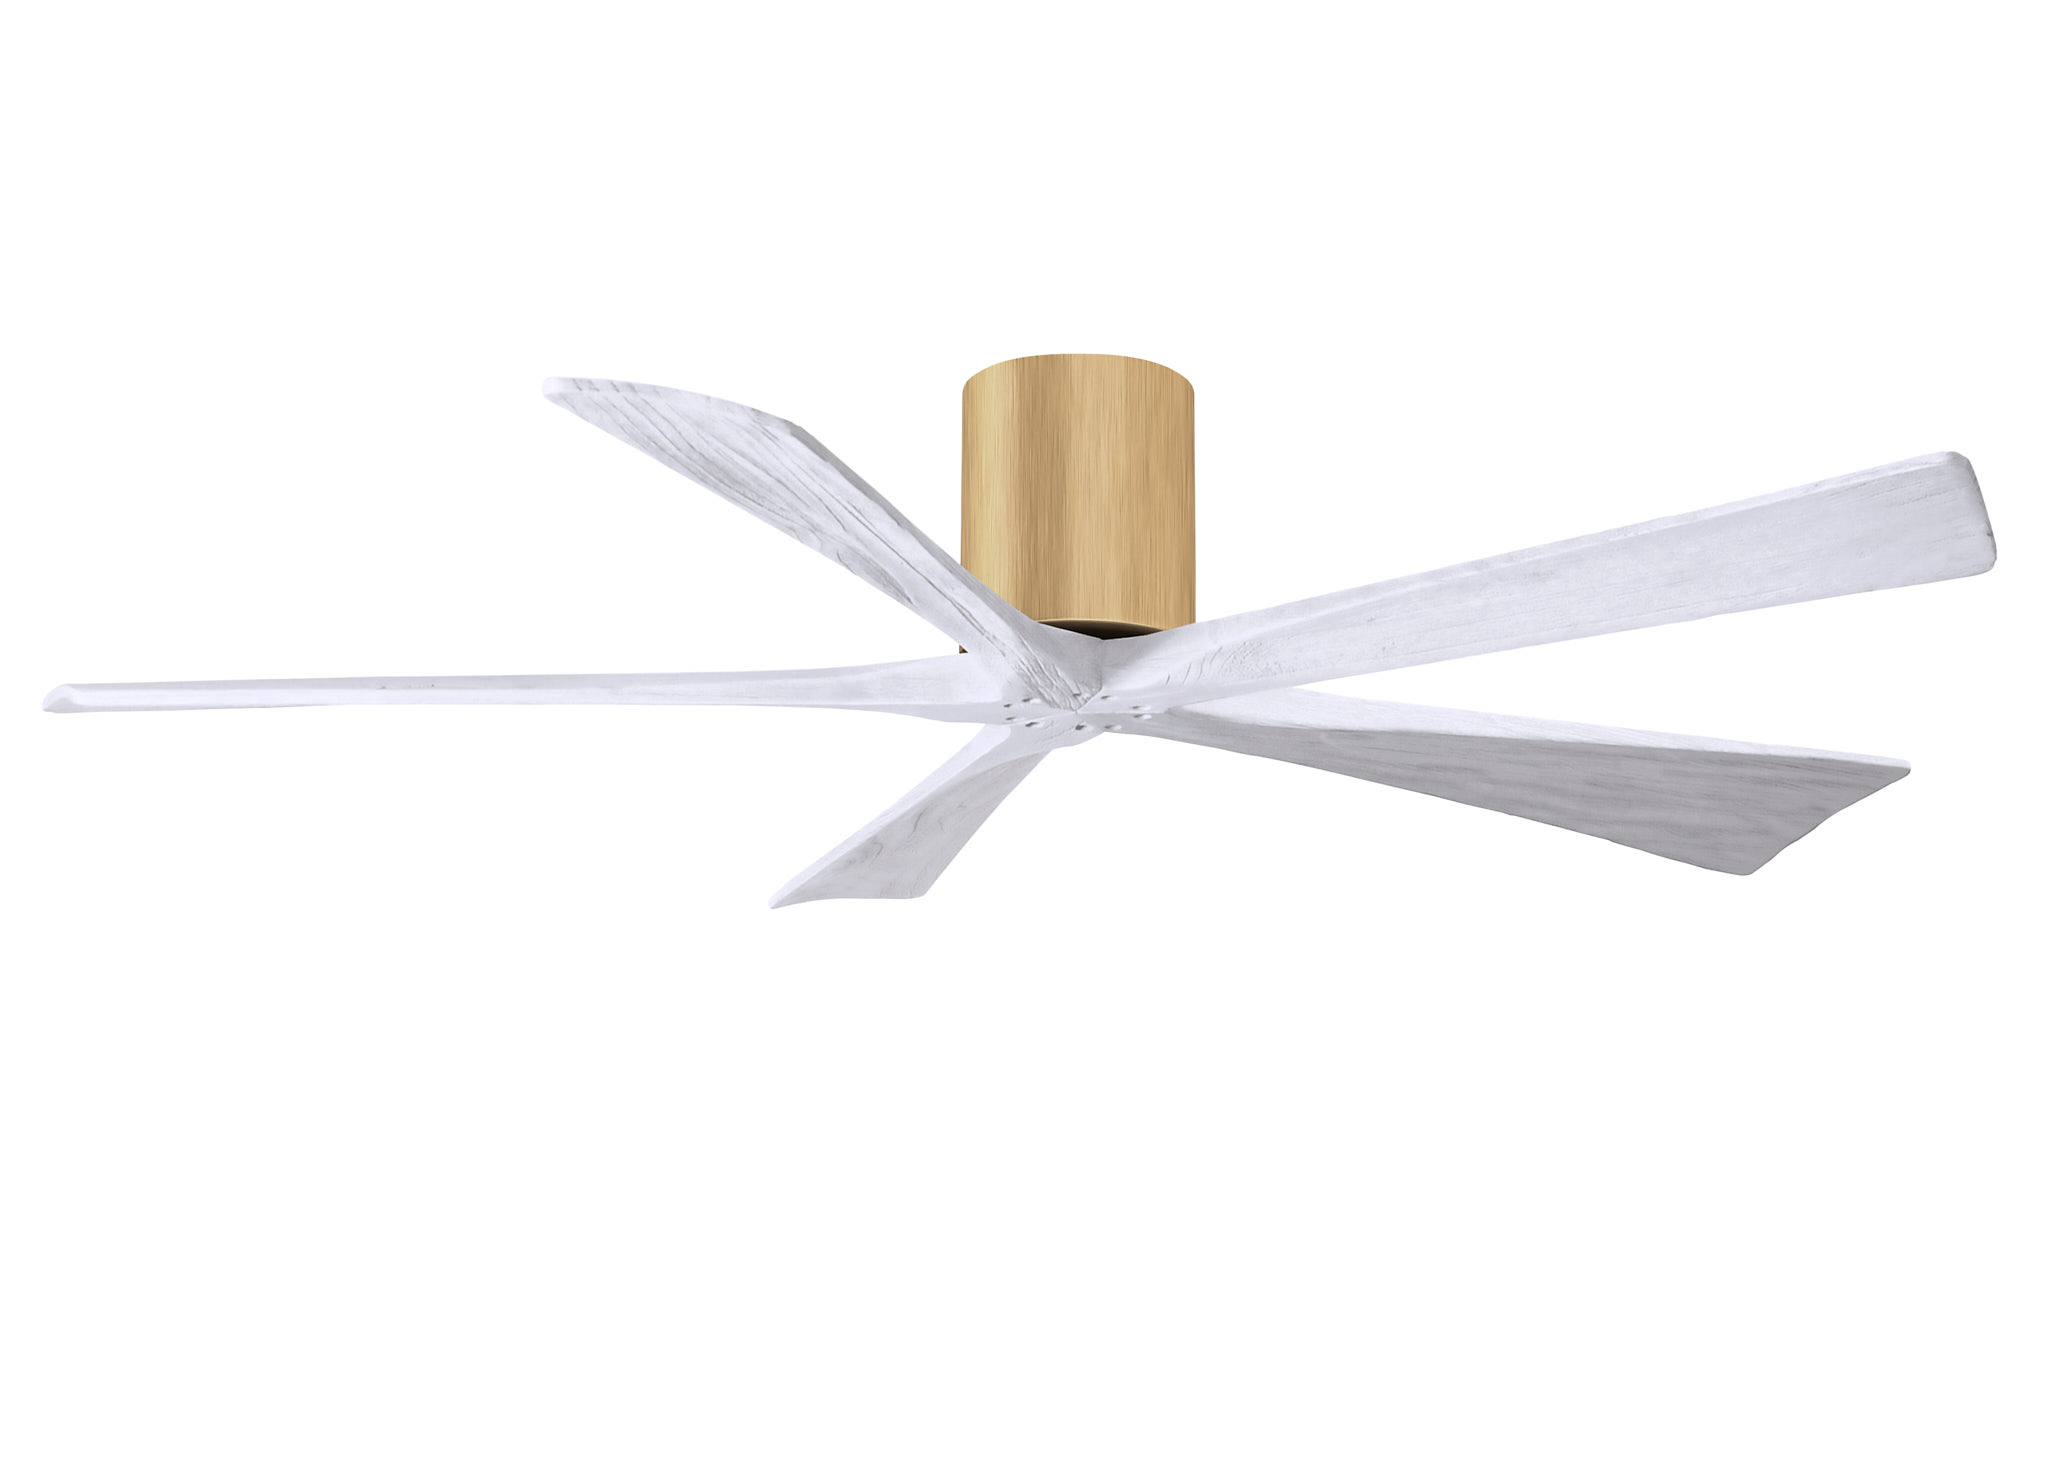 Irene-5H 6-speed ceiling fan in light maple finish with 60